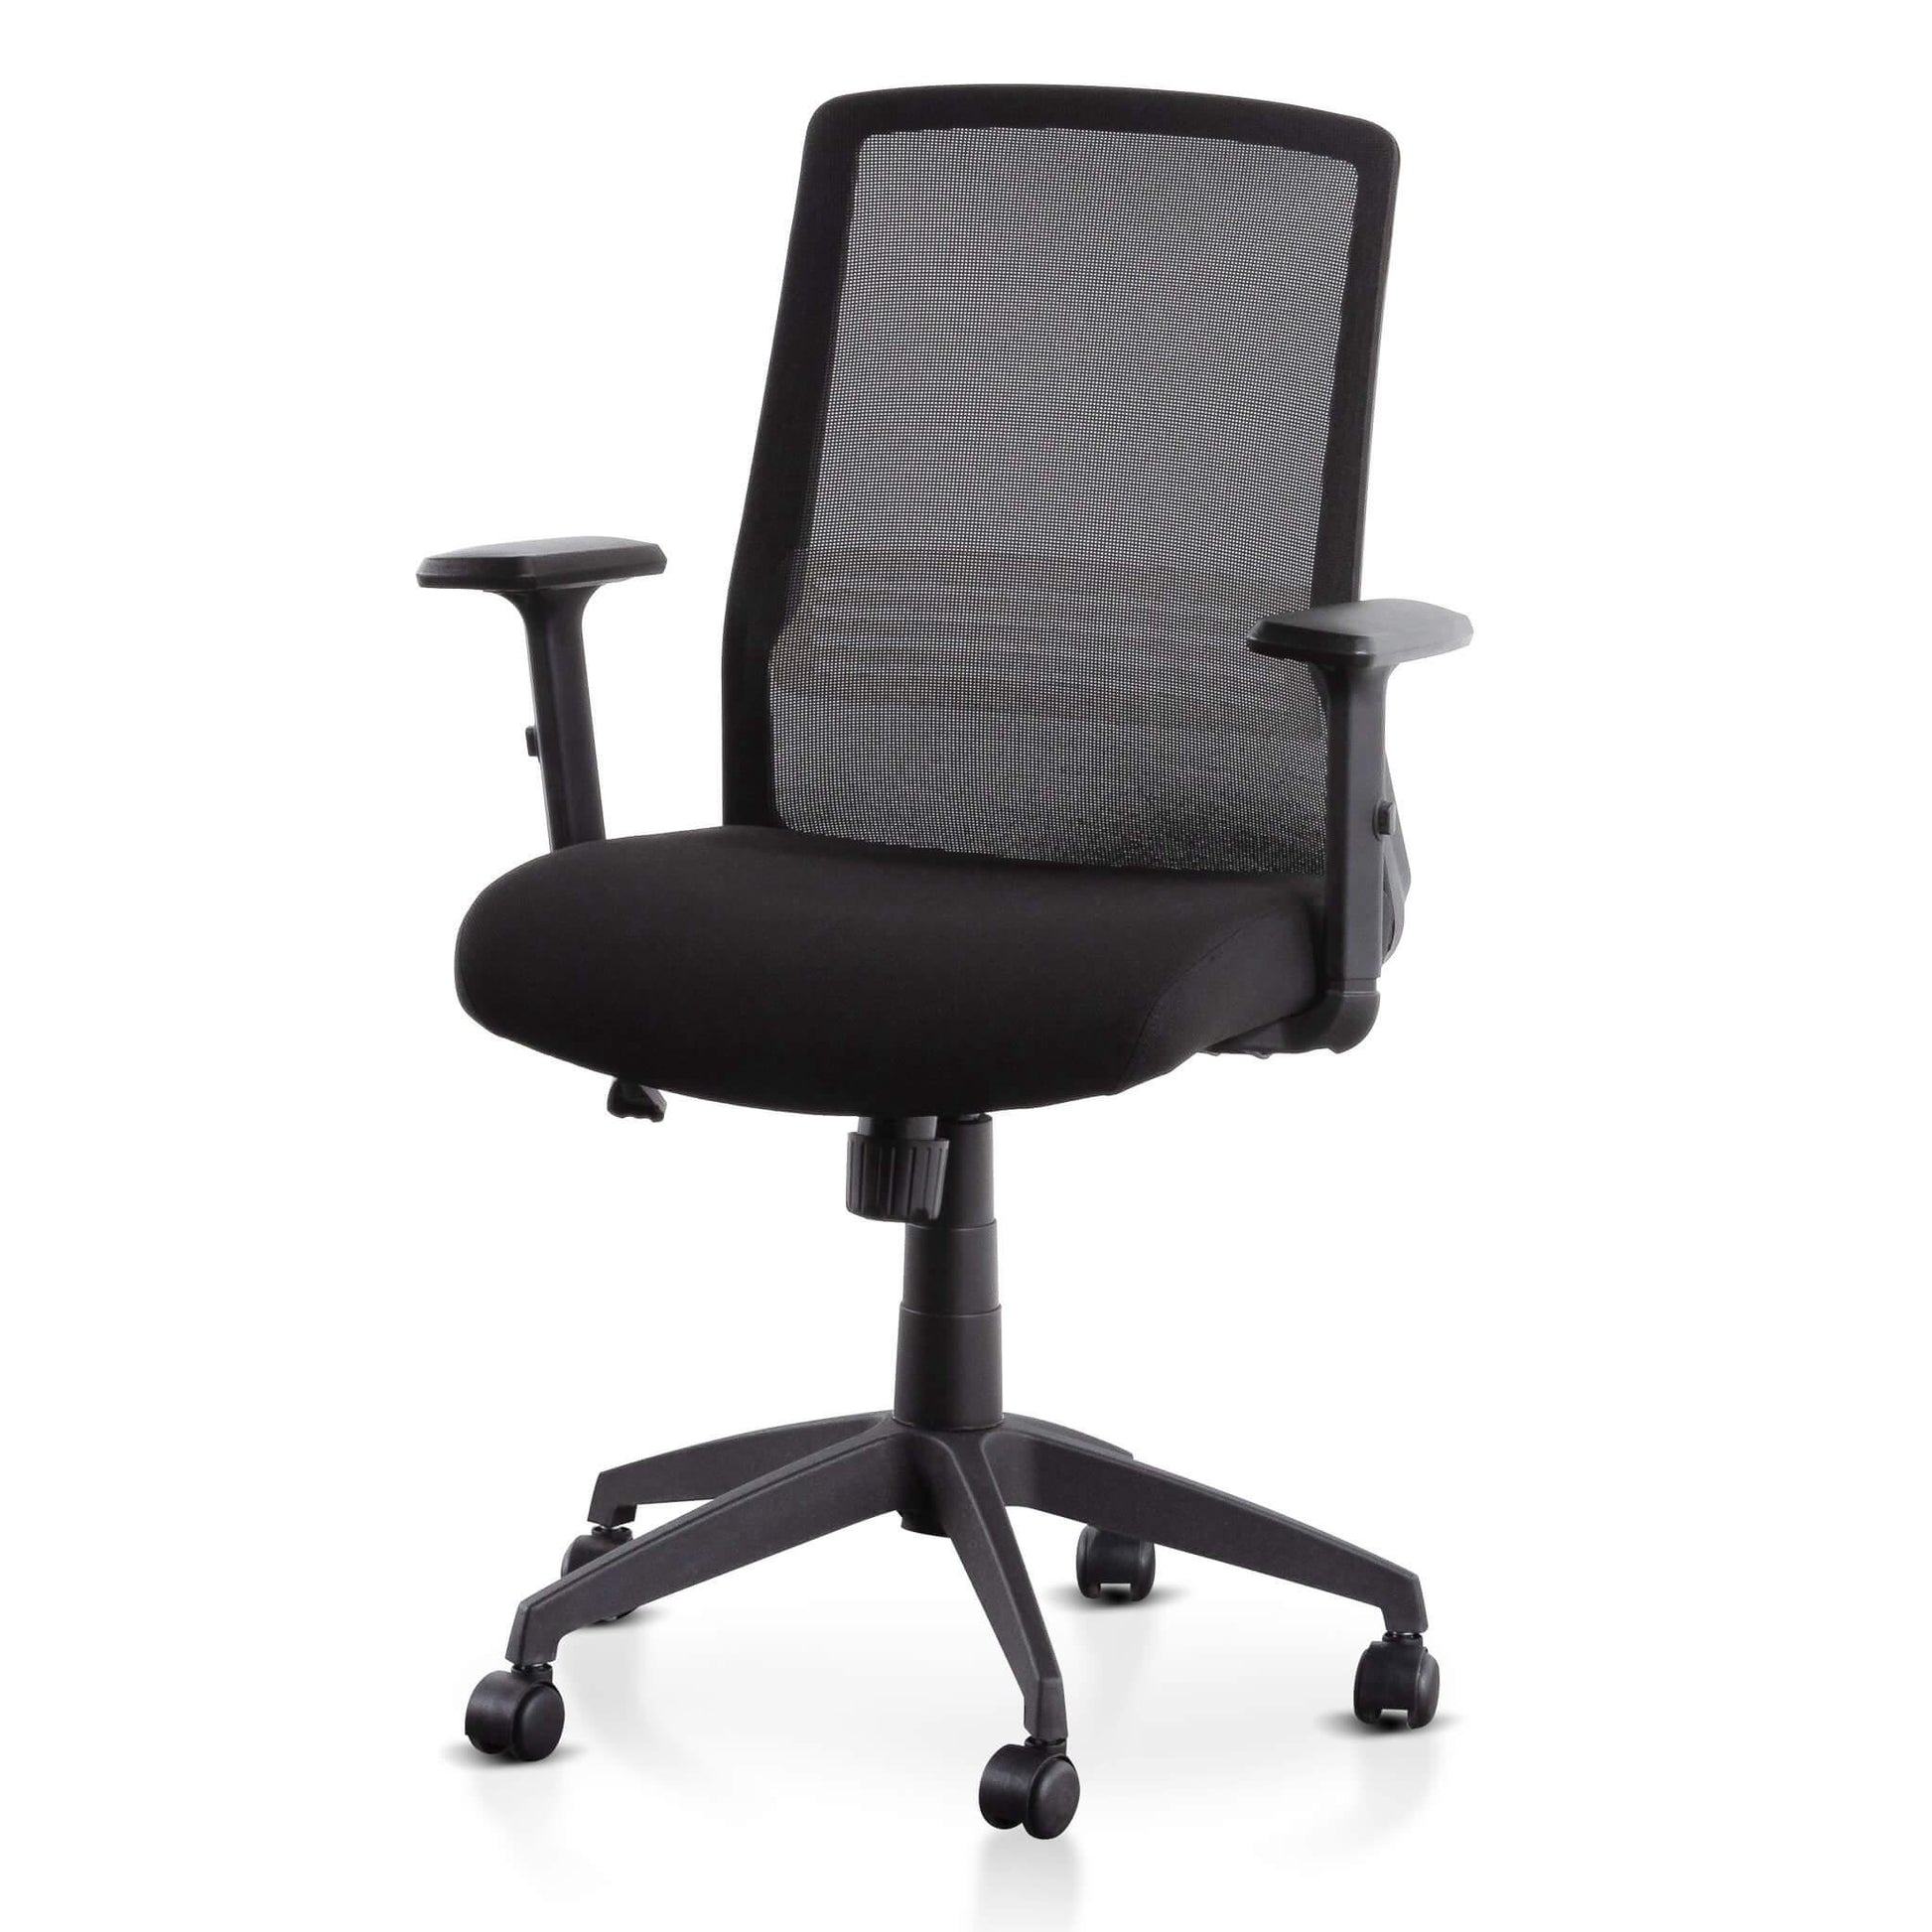 Calibre Mesh Office Chair - Full Black OC6207-LF - Office/Gaming ChairsOC6207-LF 2